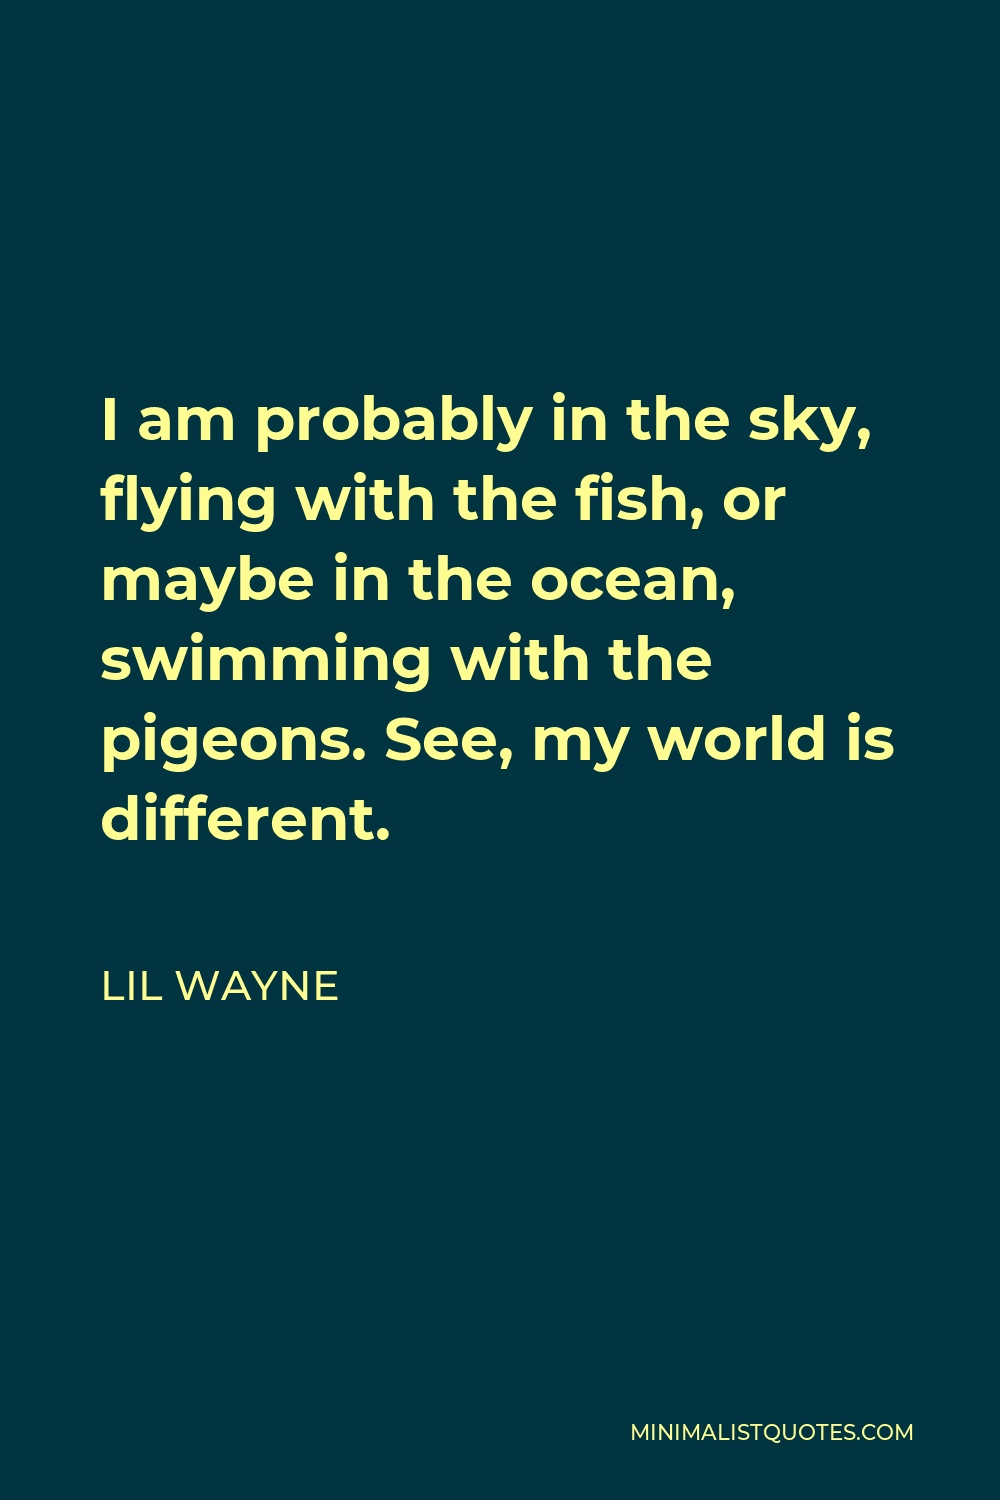 Lil Wayne Quote - I am probably in the sky, flying with the fish, or maybe in the ocean, swimming with the pigeons. See, my world is different.